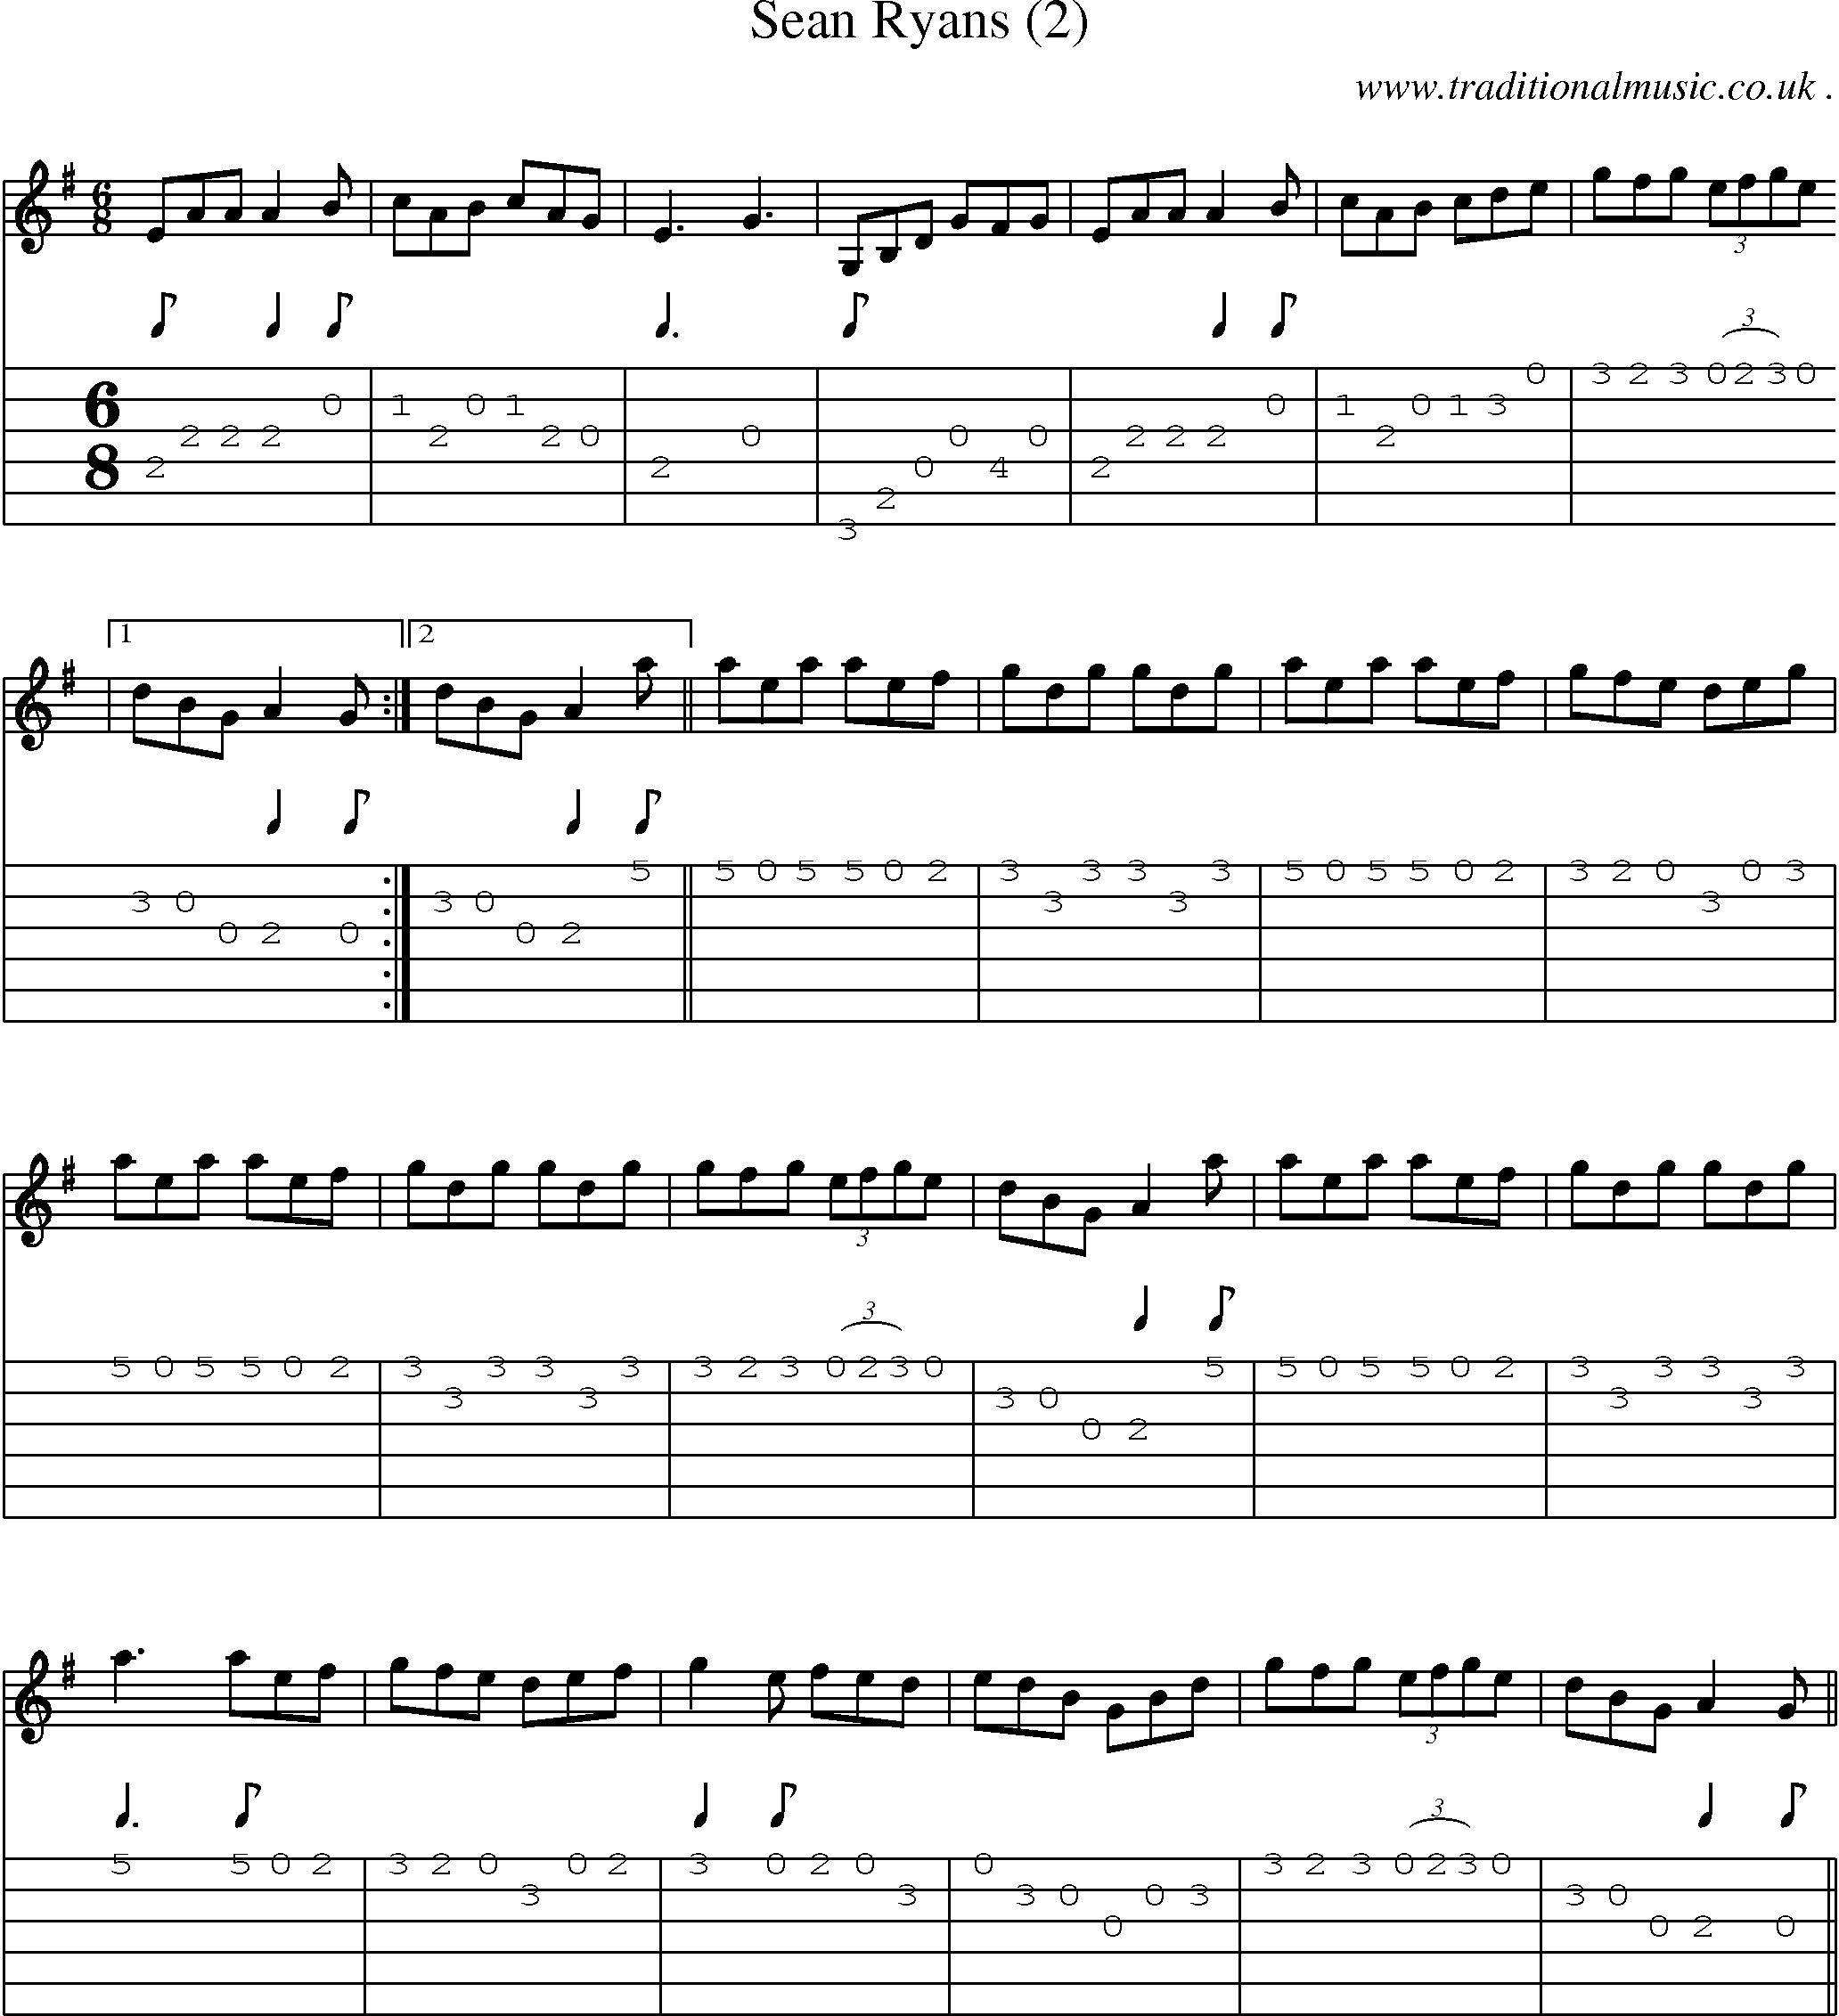 Sheet-Music and Guitar Tabs for Sean Ryans (2)